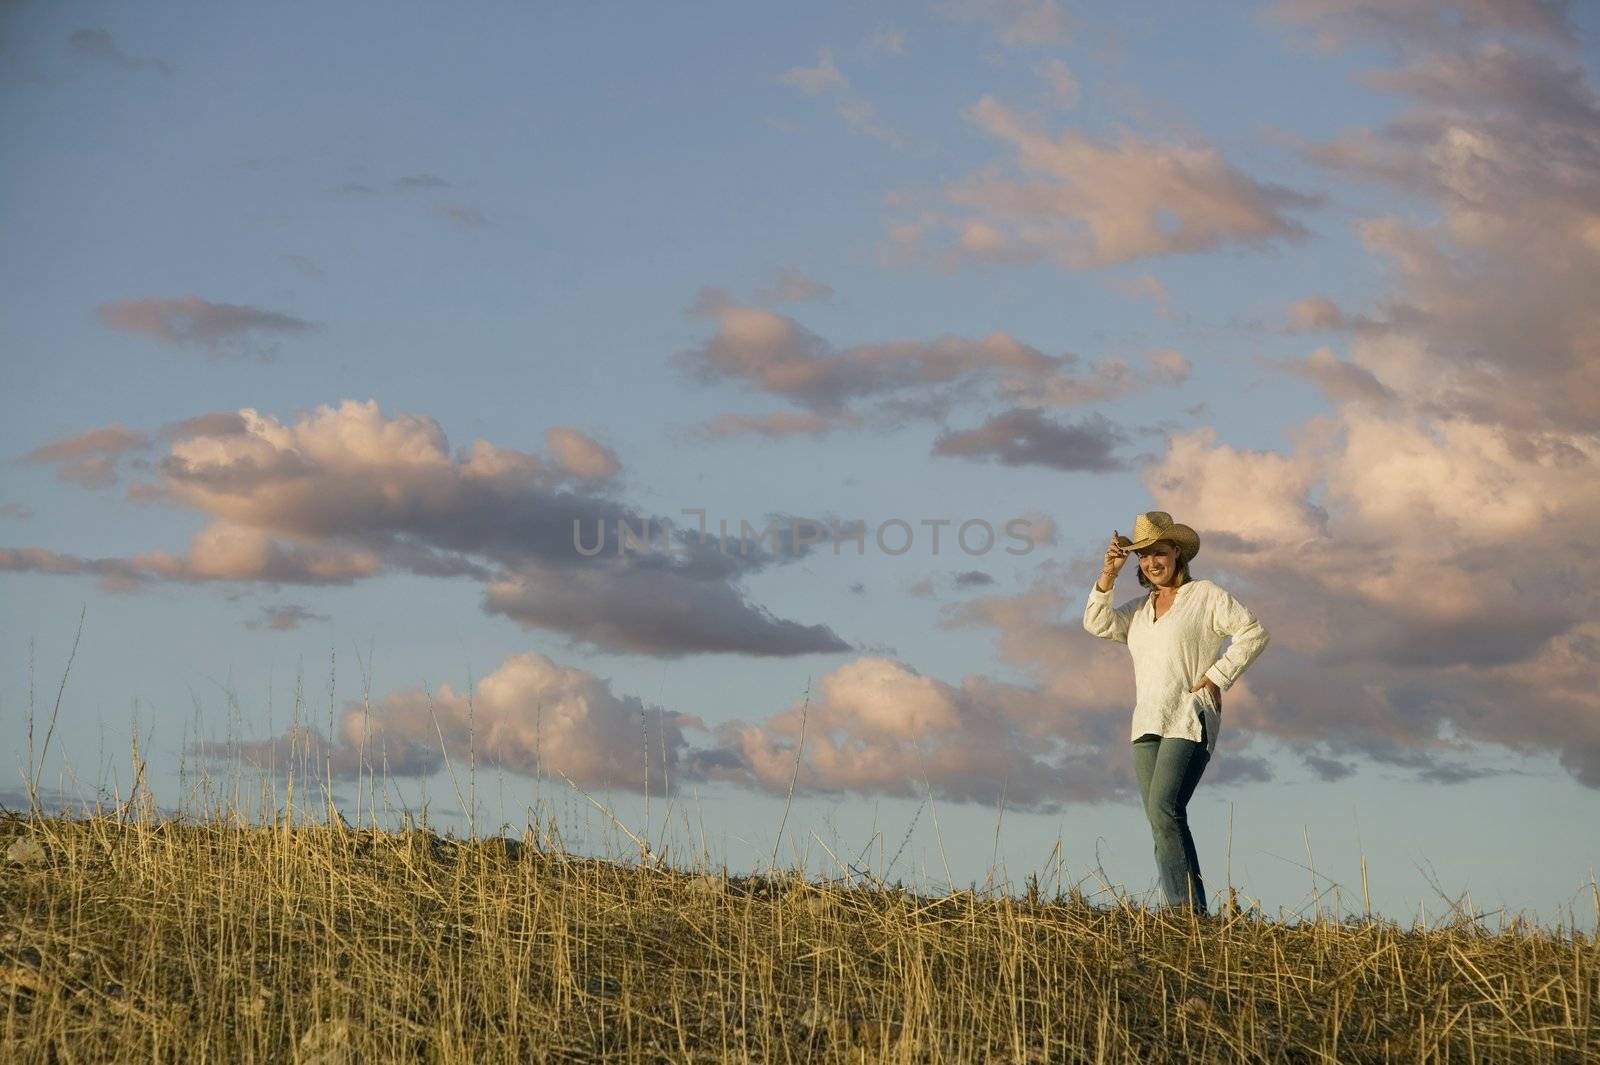 Wide angle shot of a western woman against a cloudy sky at dusk.